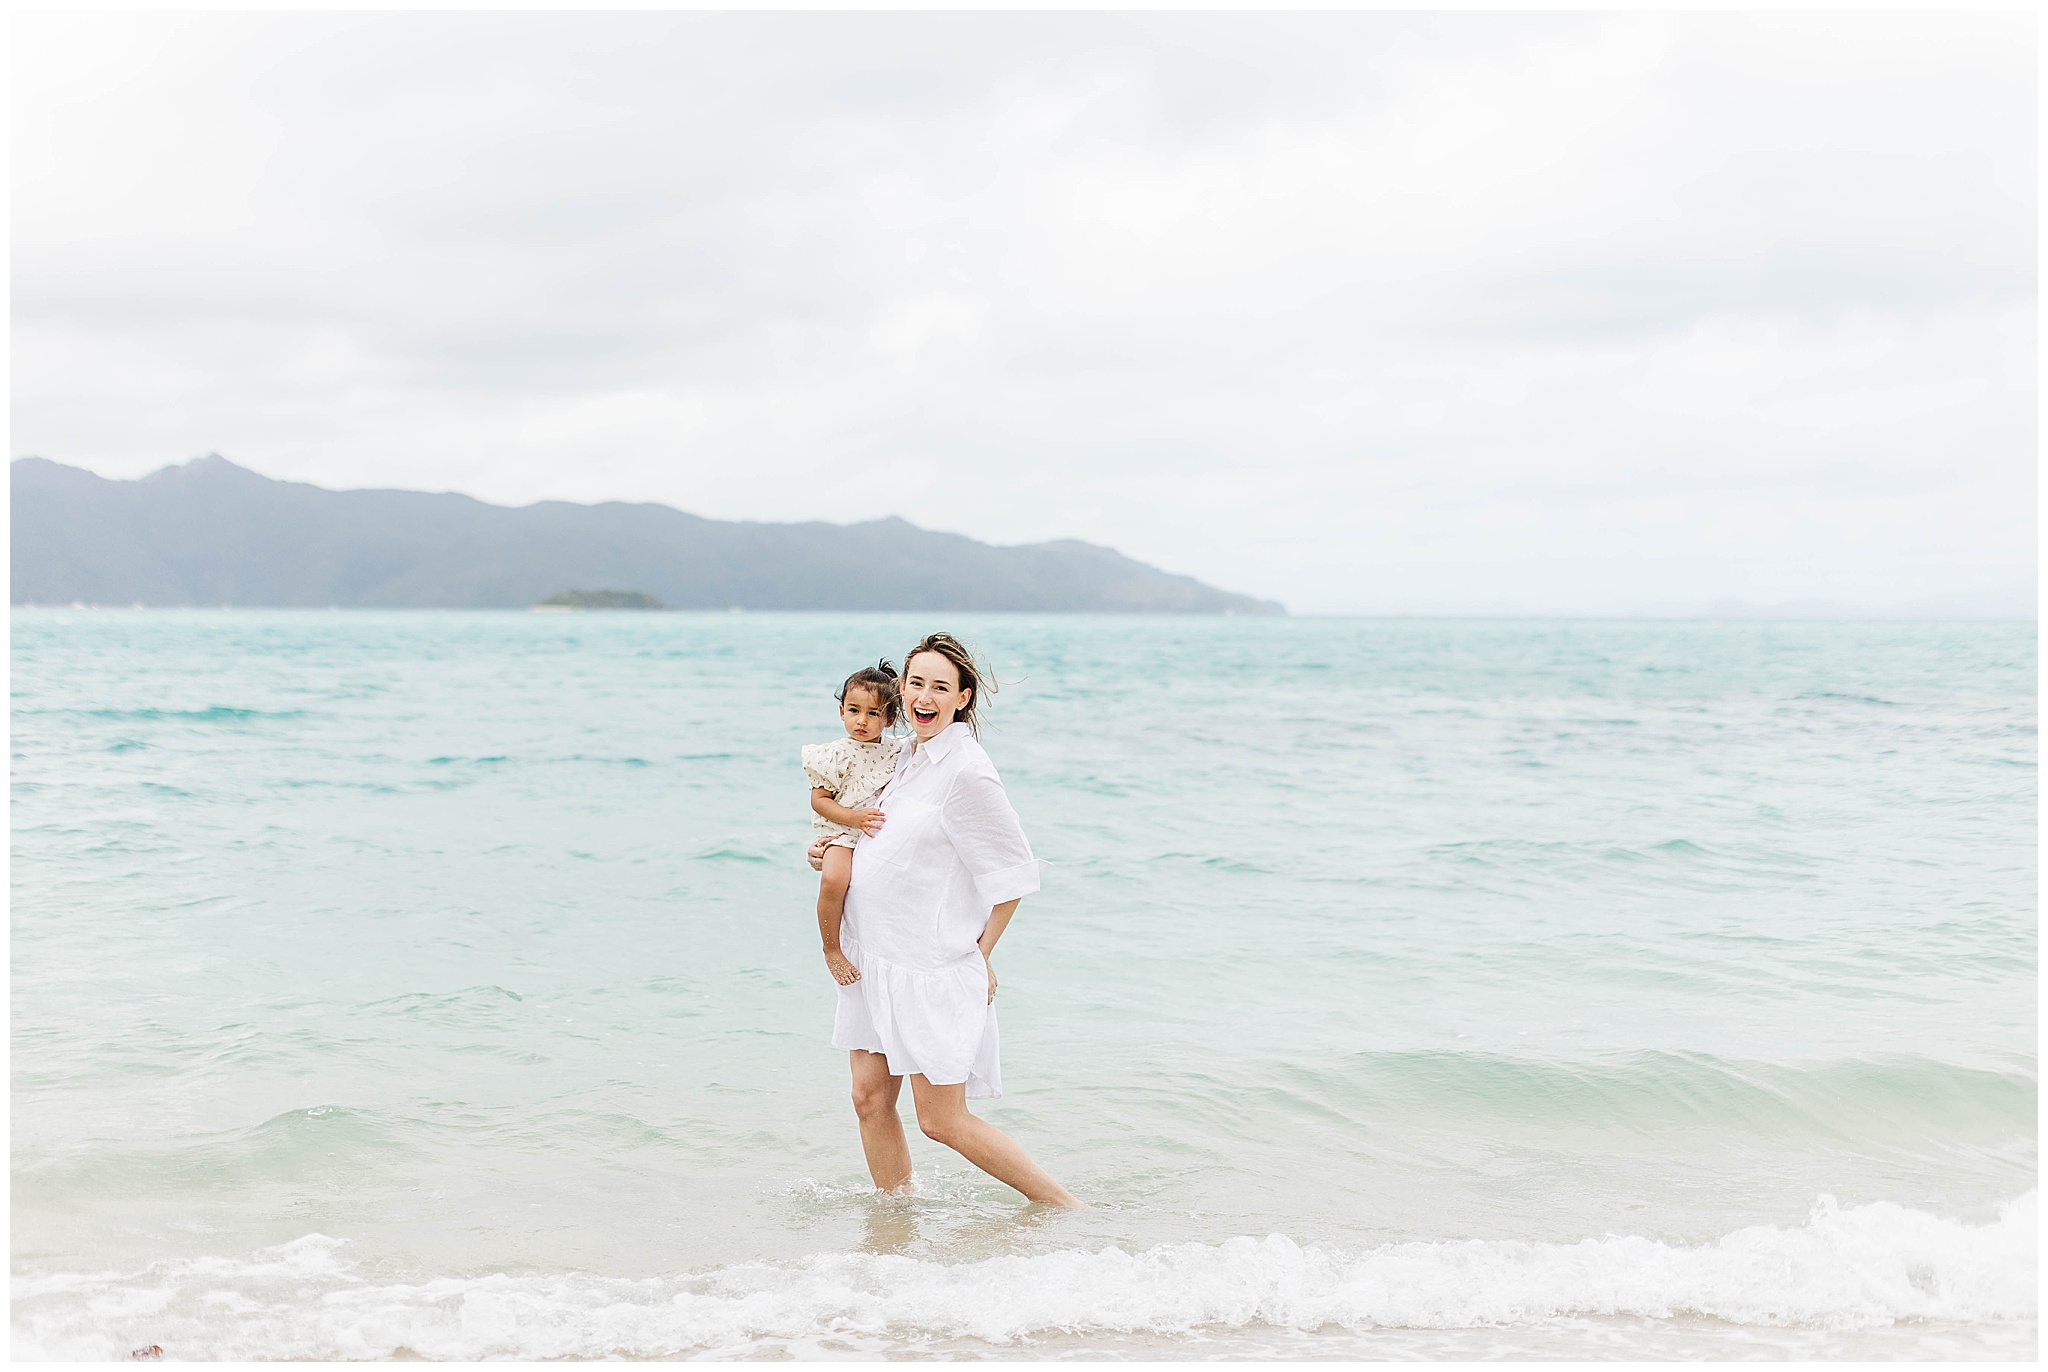 A Pregnant mum and her child having maternity photoshoot on Hayman Island by ALyce Holzy Photographer